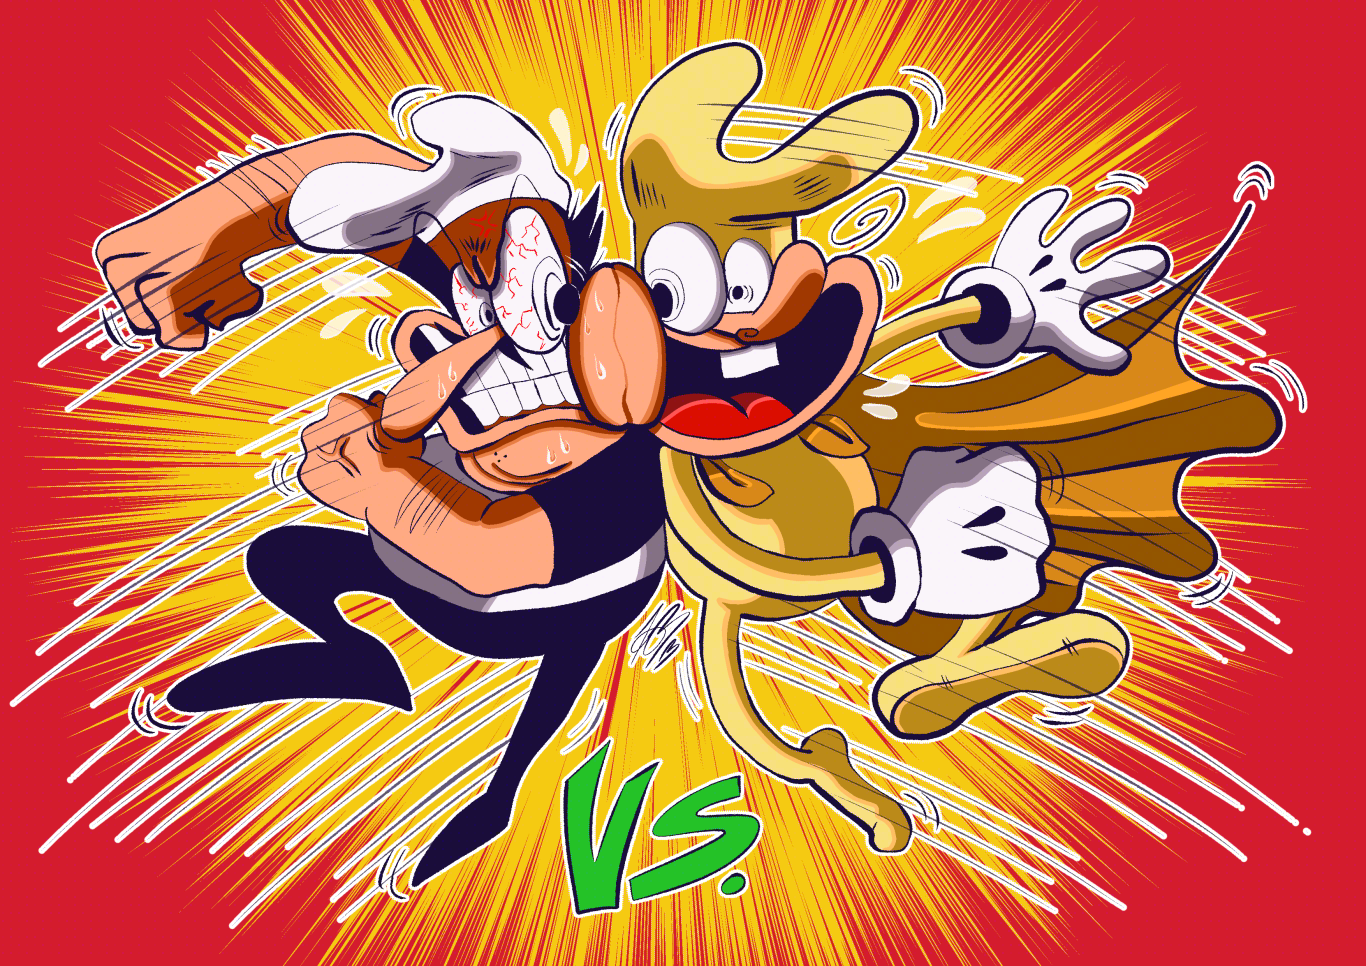 Full colour illustration of Peppino and The Noise from Pizza Tower bashing into each other, cheek-to-cheek in combat. There's a red and yellow action flash behind them and the VS. symbol is shown below them.